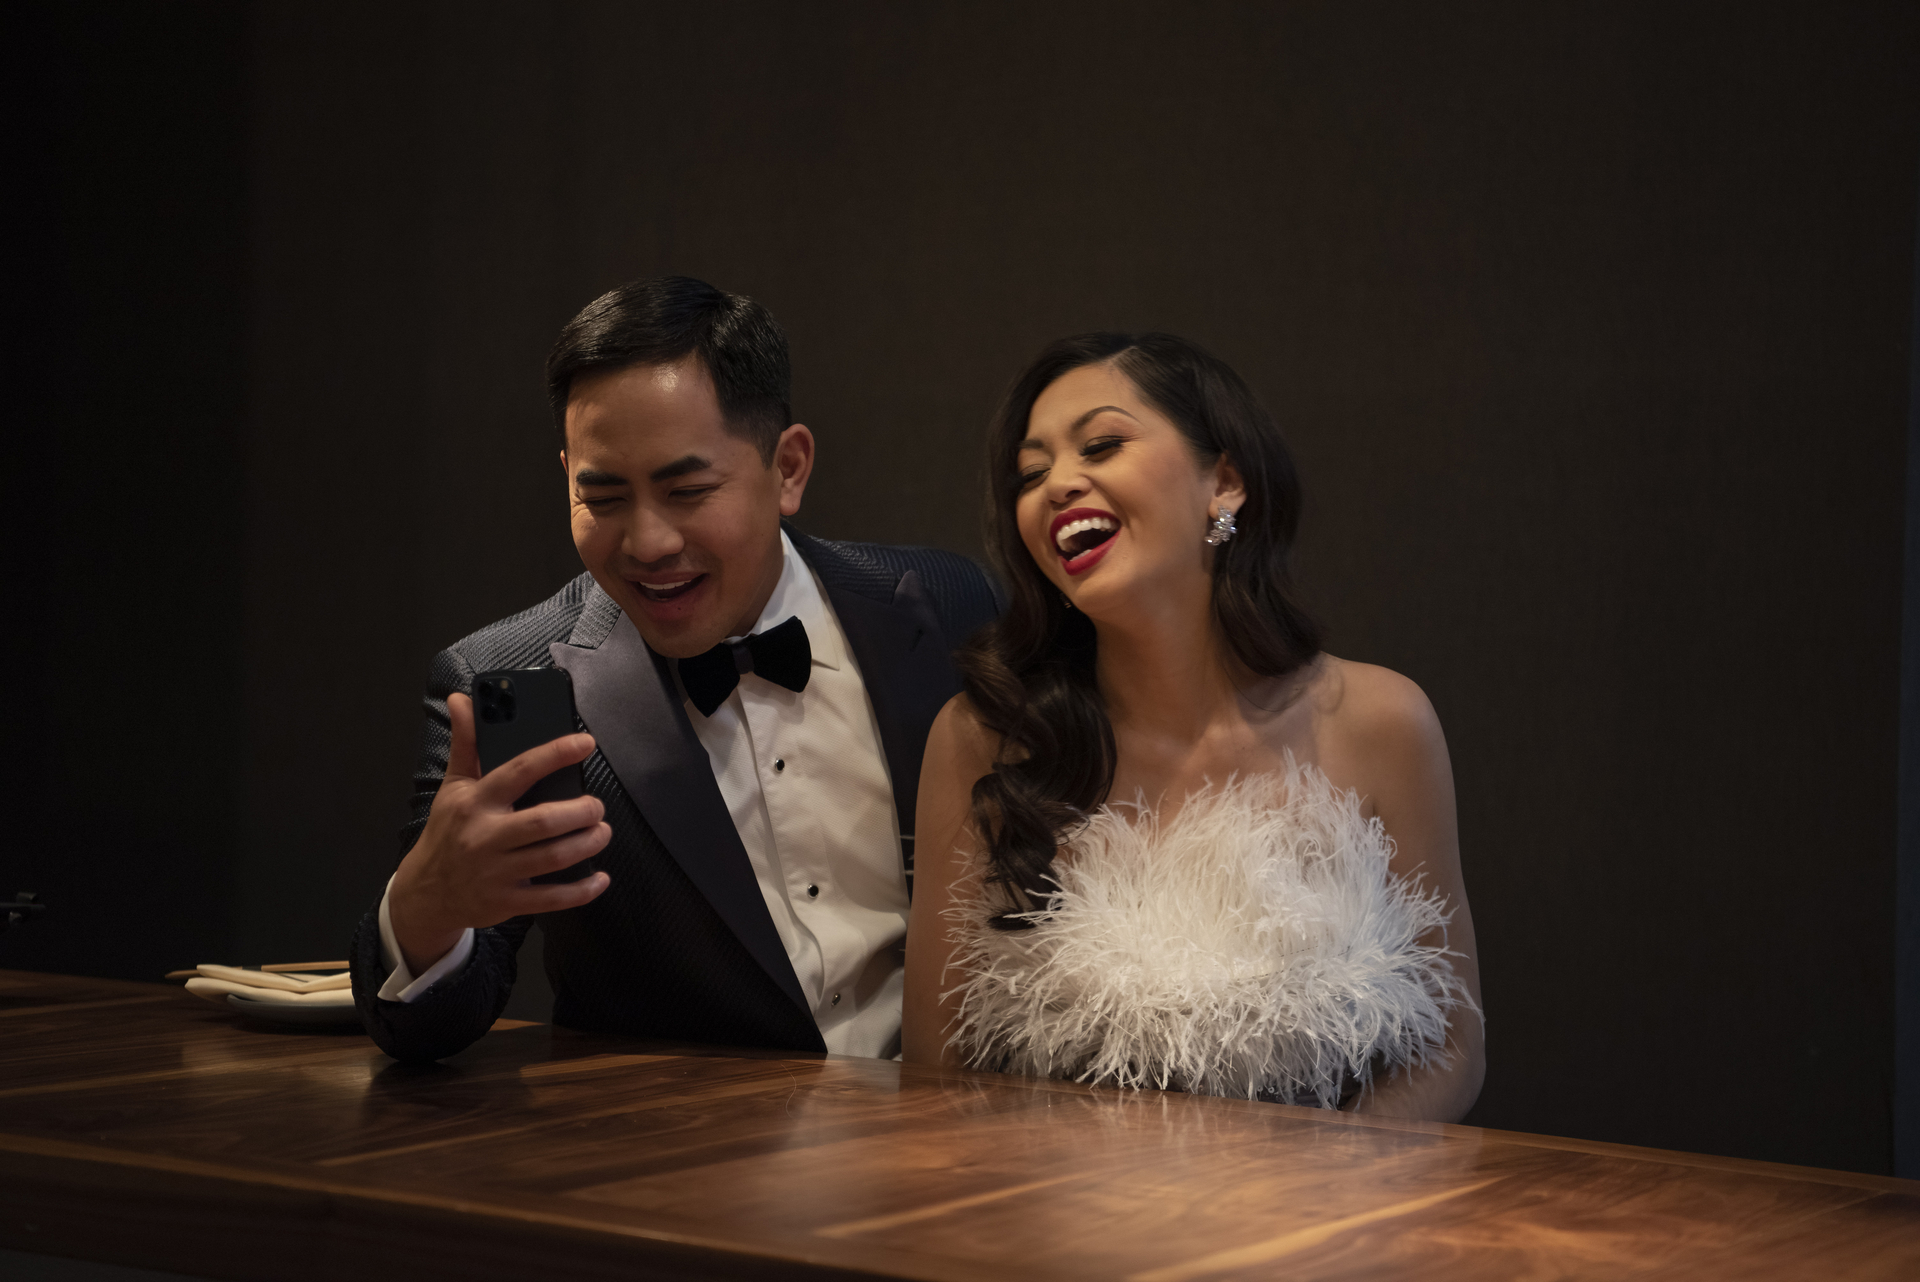 Washington Ho, in a tuxedo with bow tie, and Lesley Ho, in a fluffy white designer dress, are seated and laughing theatrically as they look into a phone as if taking a selfie or on a video call.